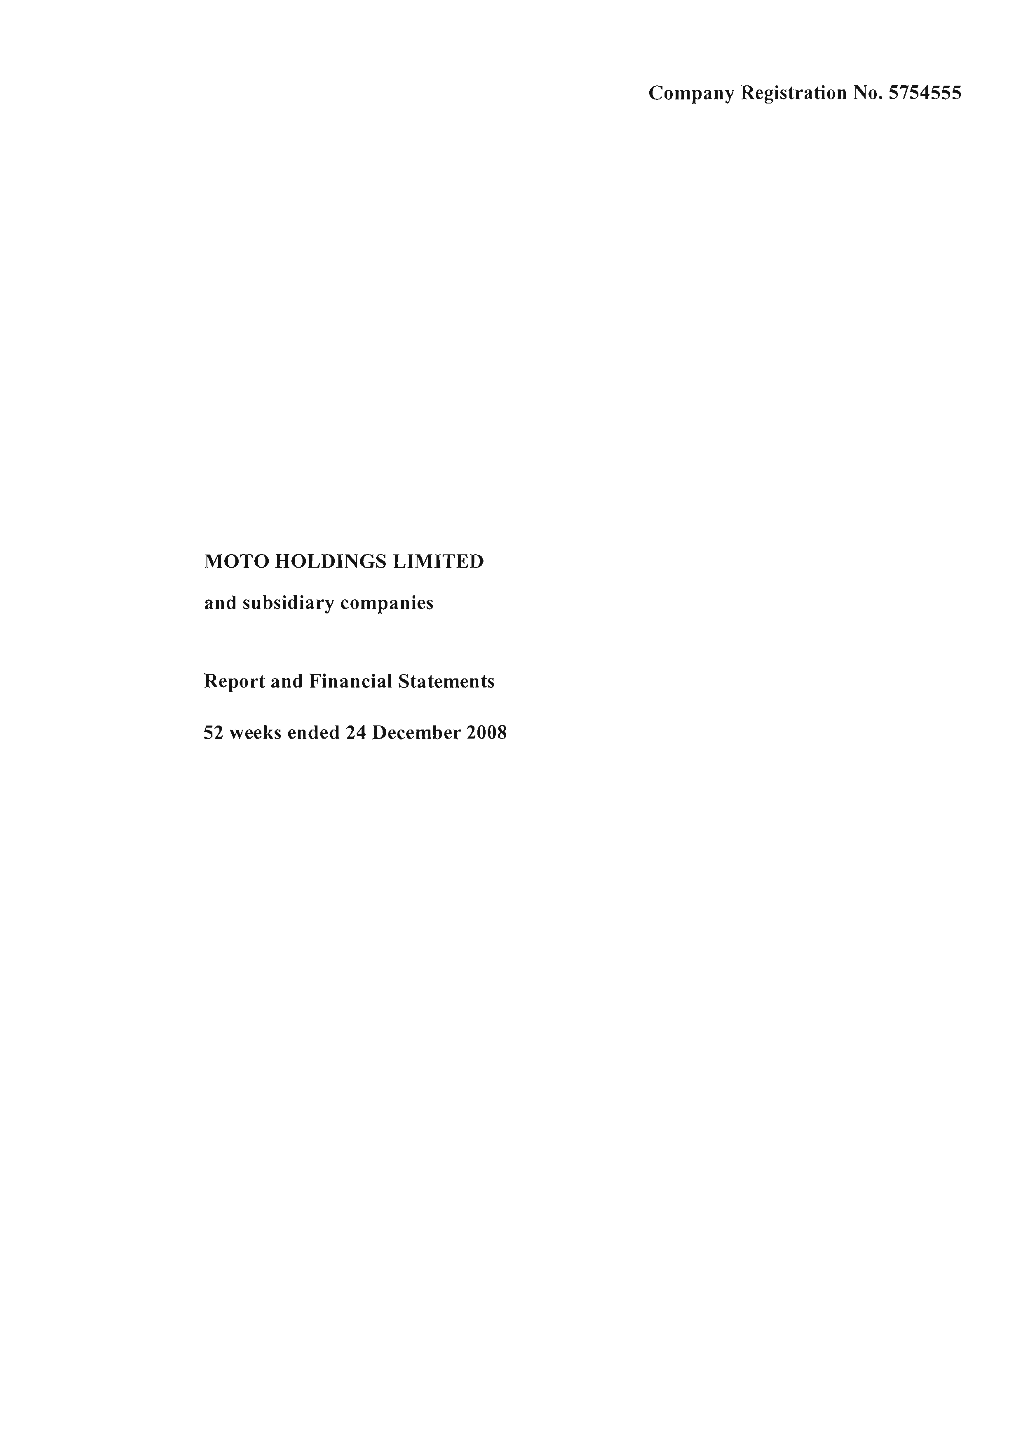 Report and Financial Statements – 2008